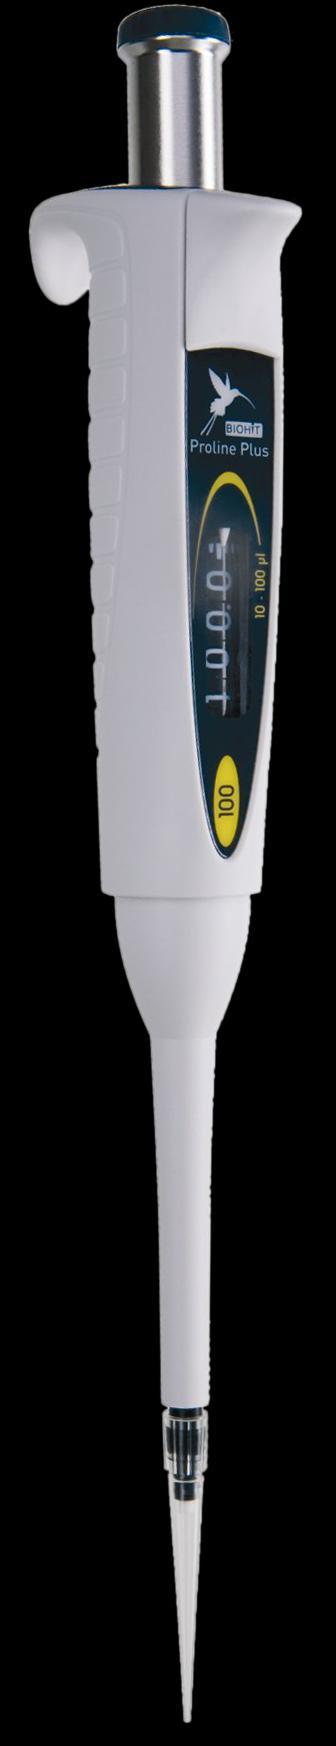 DISCOVERY PRO vs BIOHIT PROLINE PLUS Comparable ergonomics handle provides comfortable grip regardless of pipetting technigue more comfortable pushbutton and ejector button pipetting forces in the